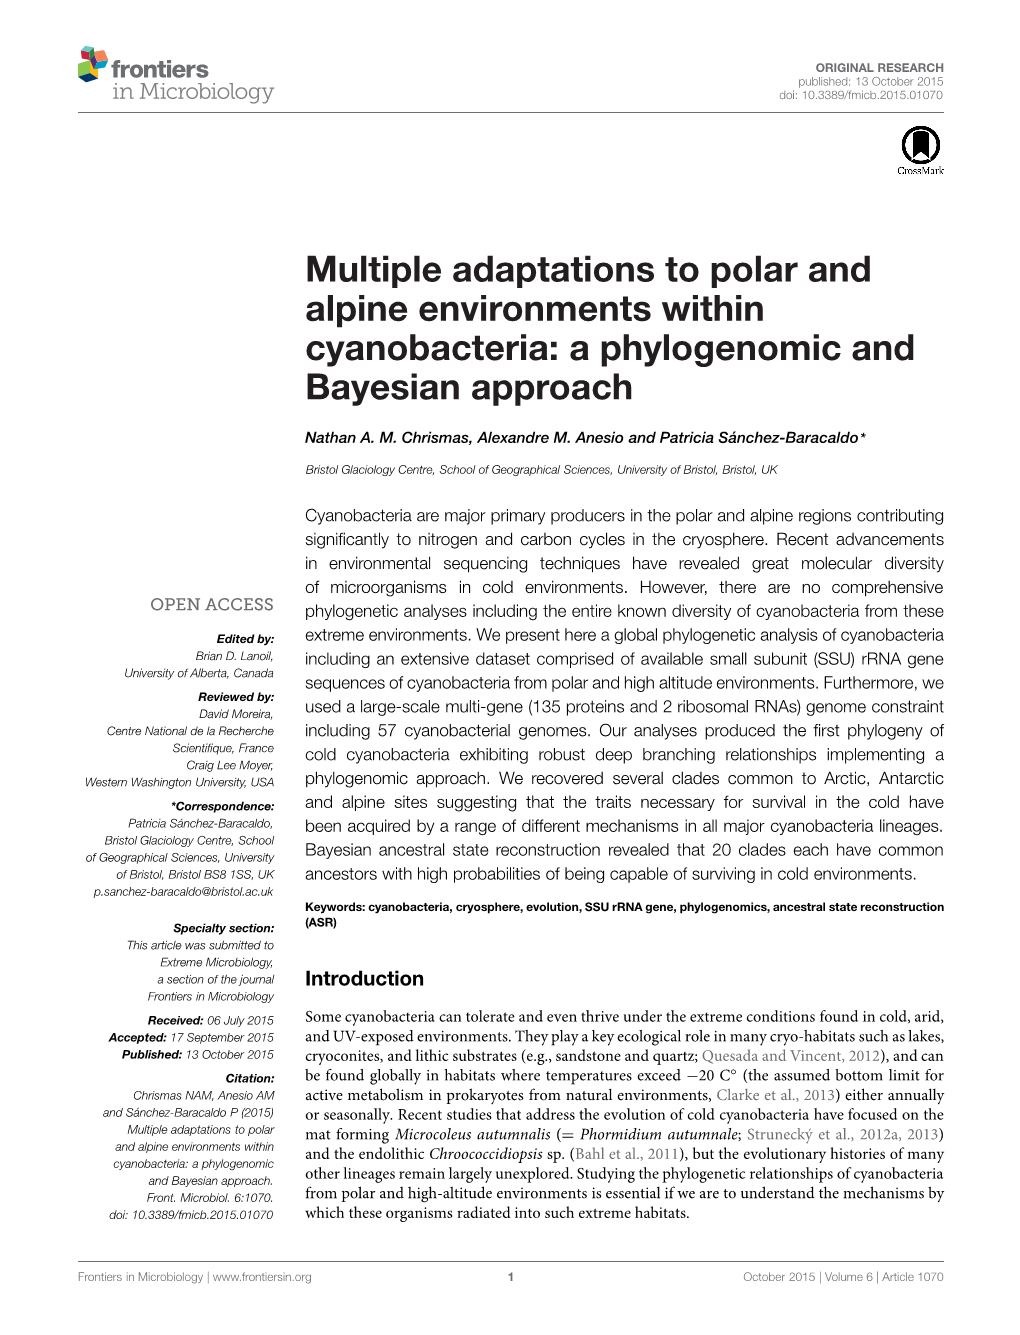 Multiple Adaptations to Polar and Alpine Environments Within Cyanobacteria: a Phylogenomic and Bayesian Approach